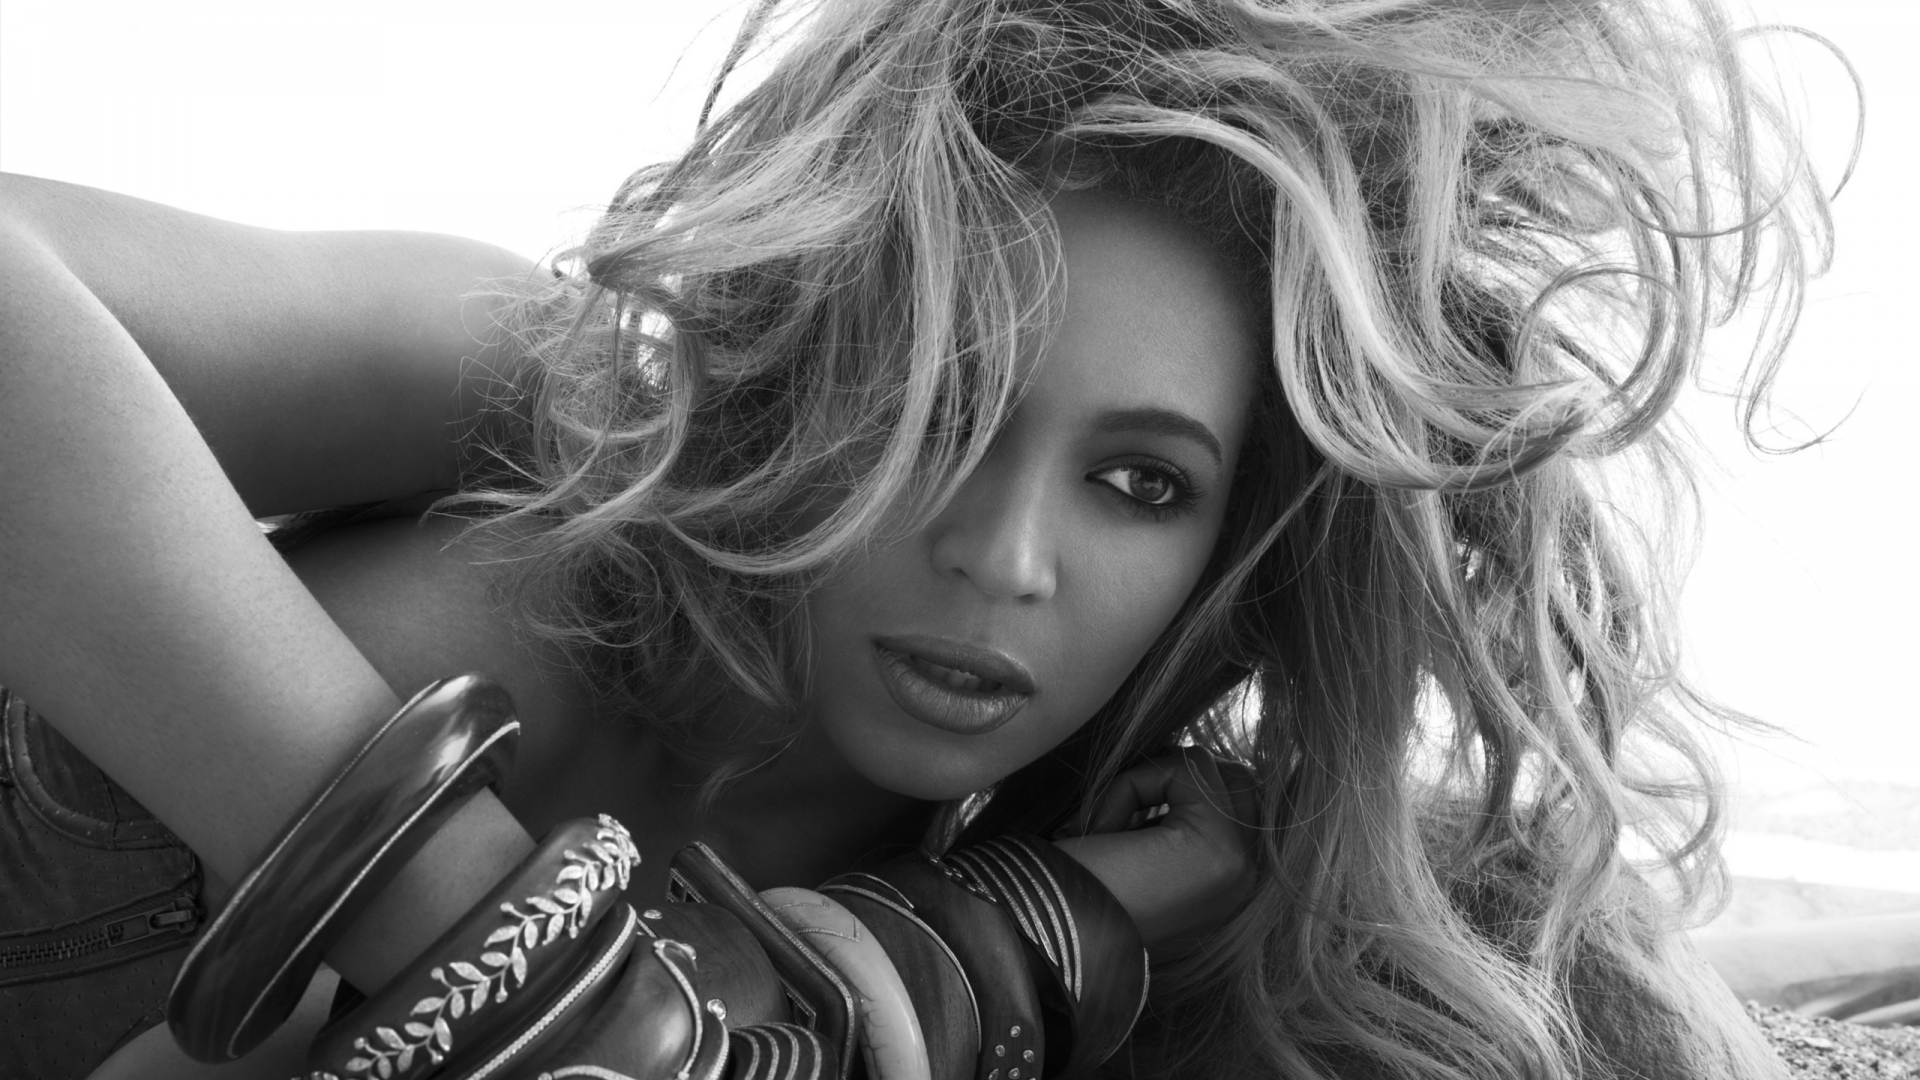 Beyonce Monochrome for 1920 x 1080 HDTV 1080p resolution